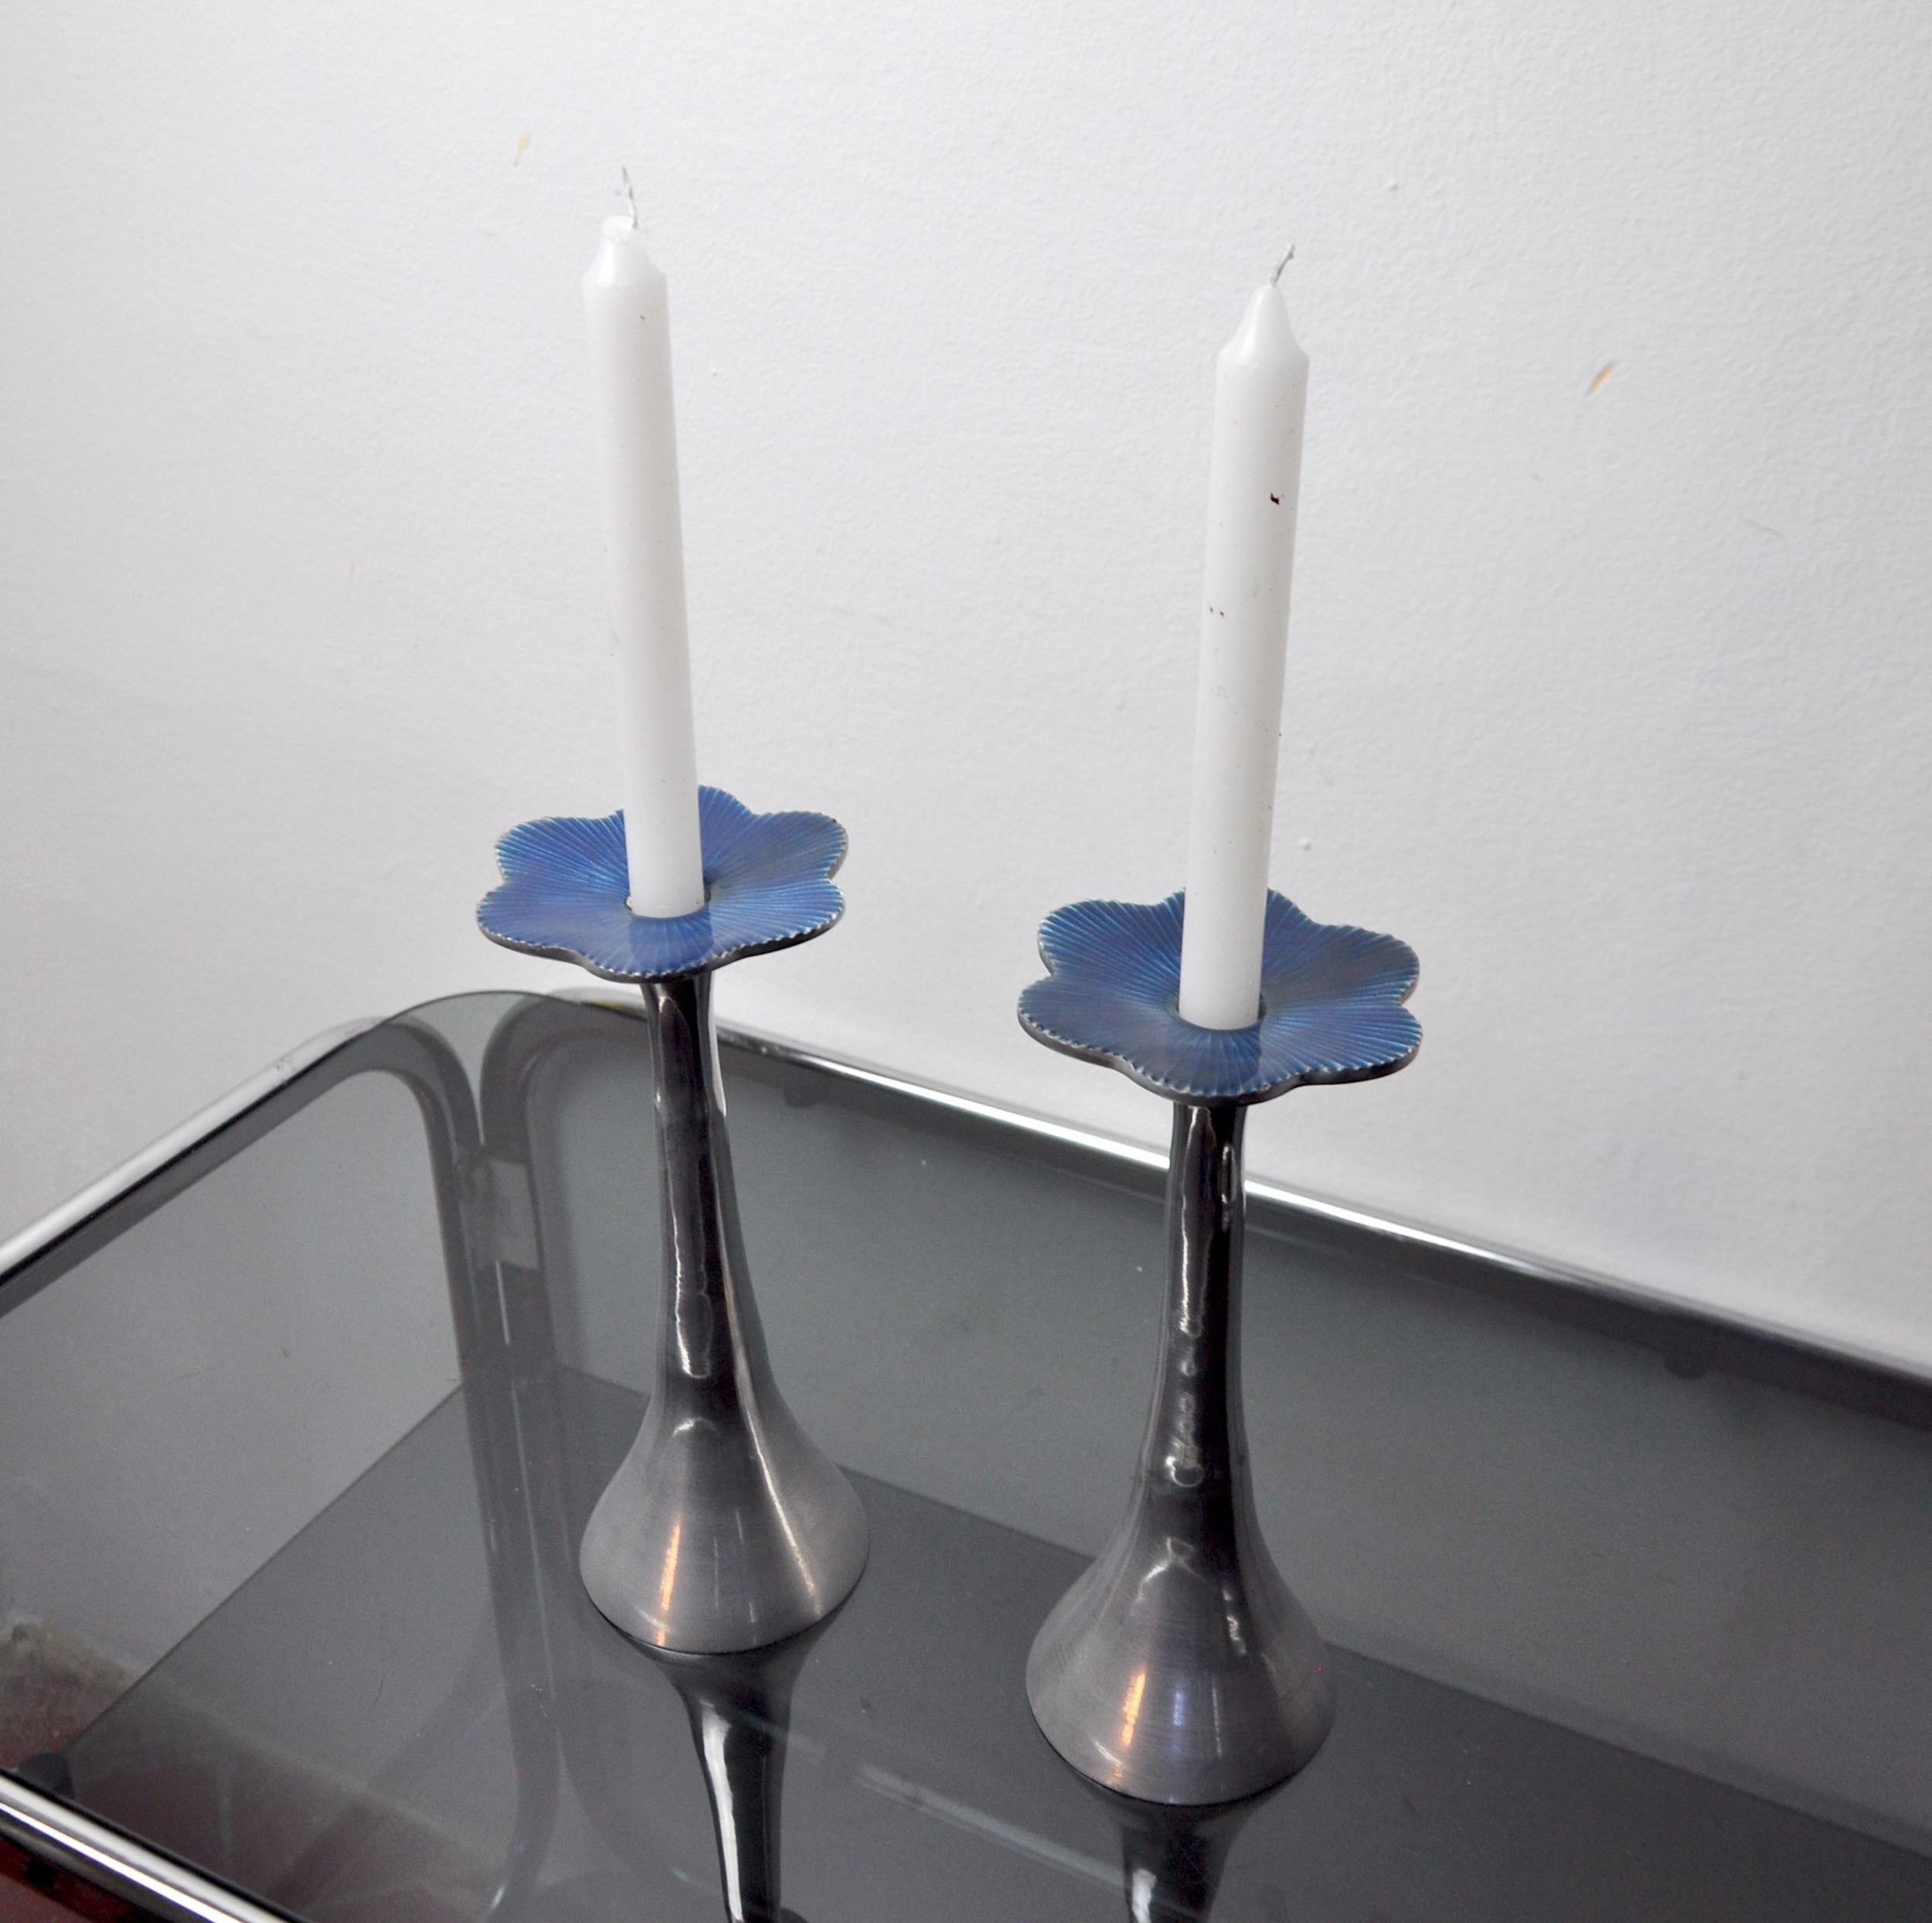 Rare and superb pair of brutalist candlesticks designed and made by the artist david marshall in the 80s, spain.

Structure representing a flower made of aluminum and blue enamel.

Real work of art, design objects that will decorate your